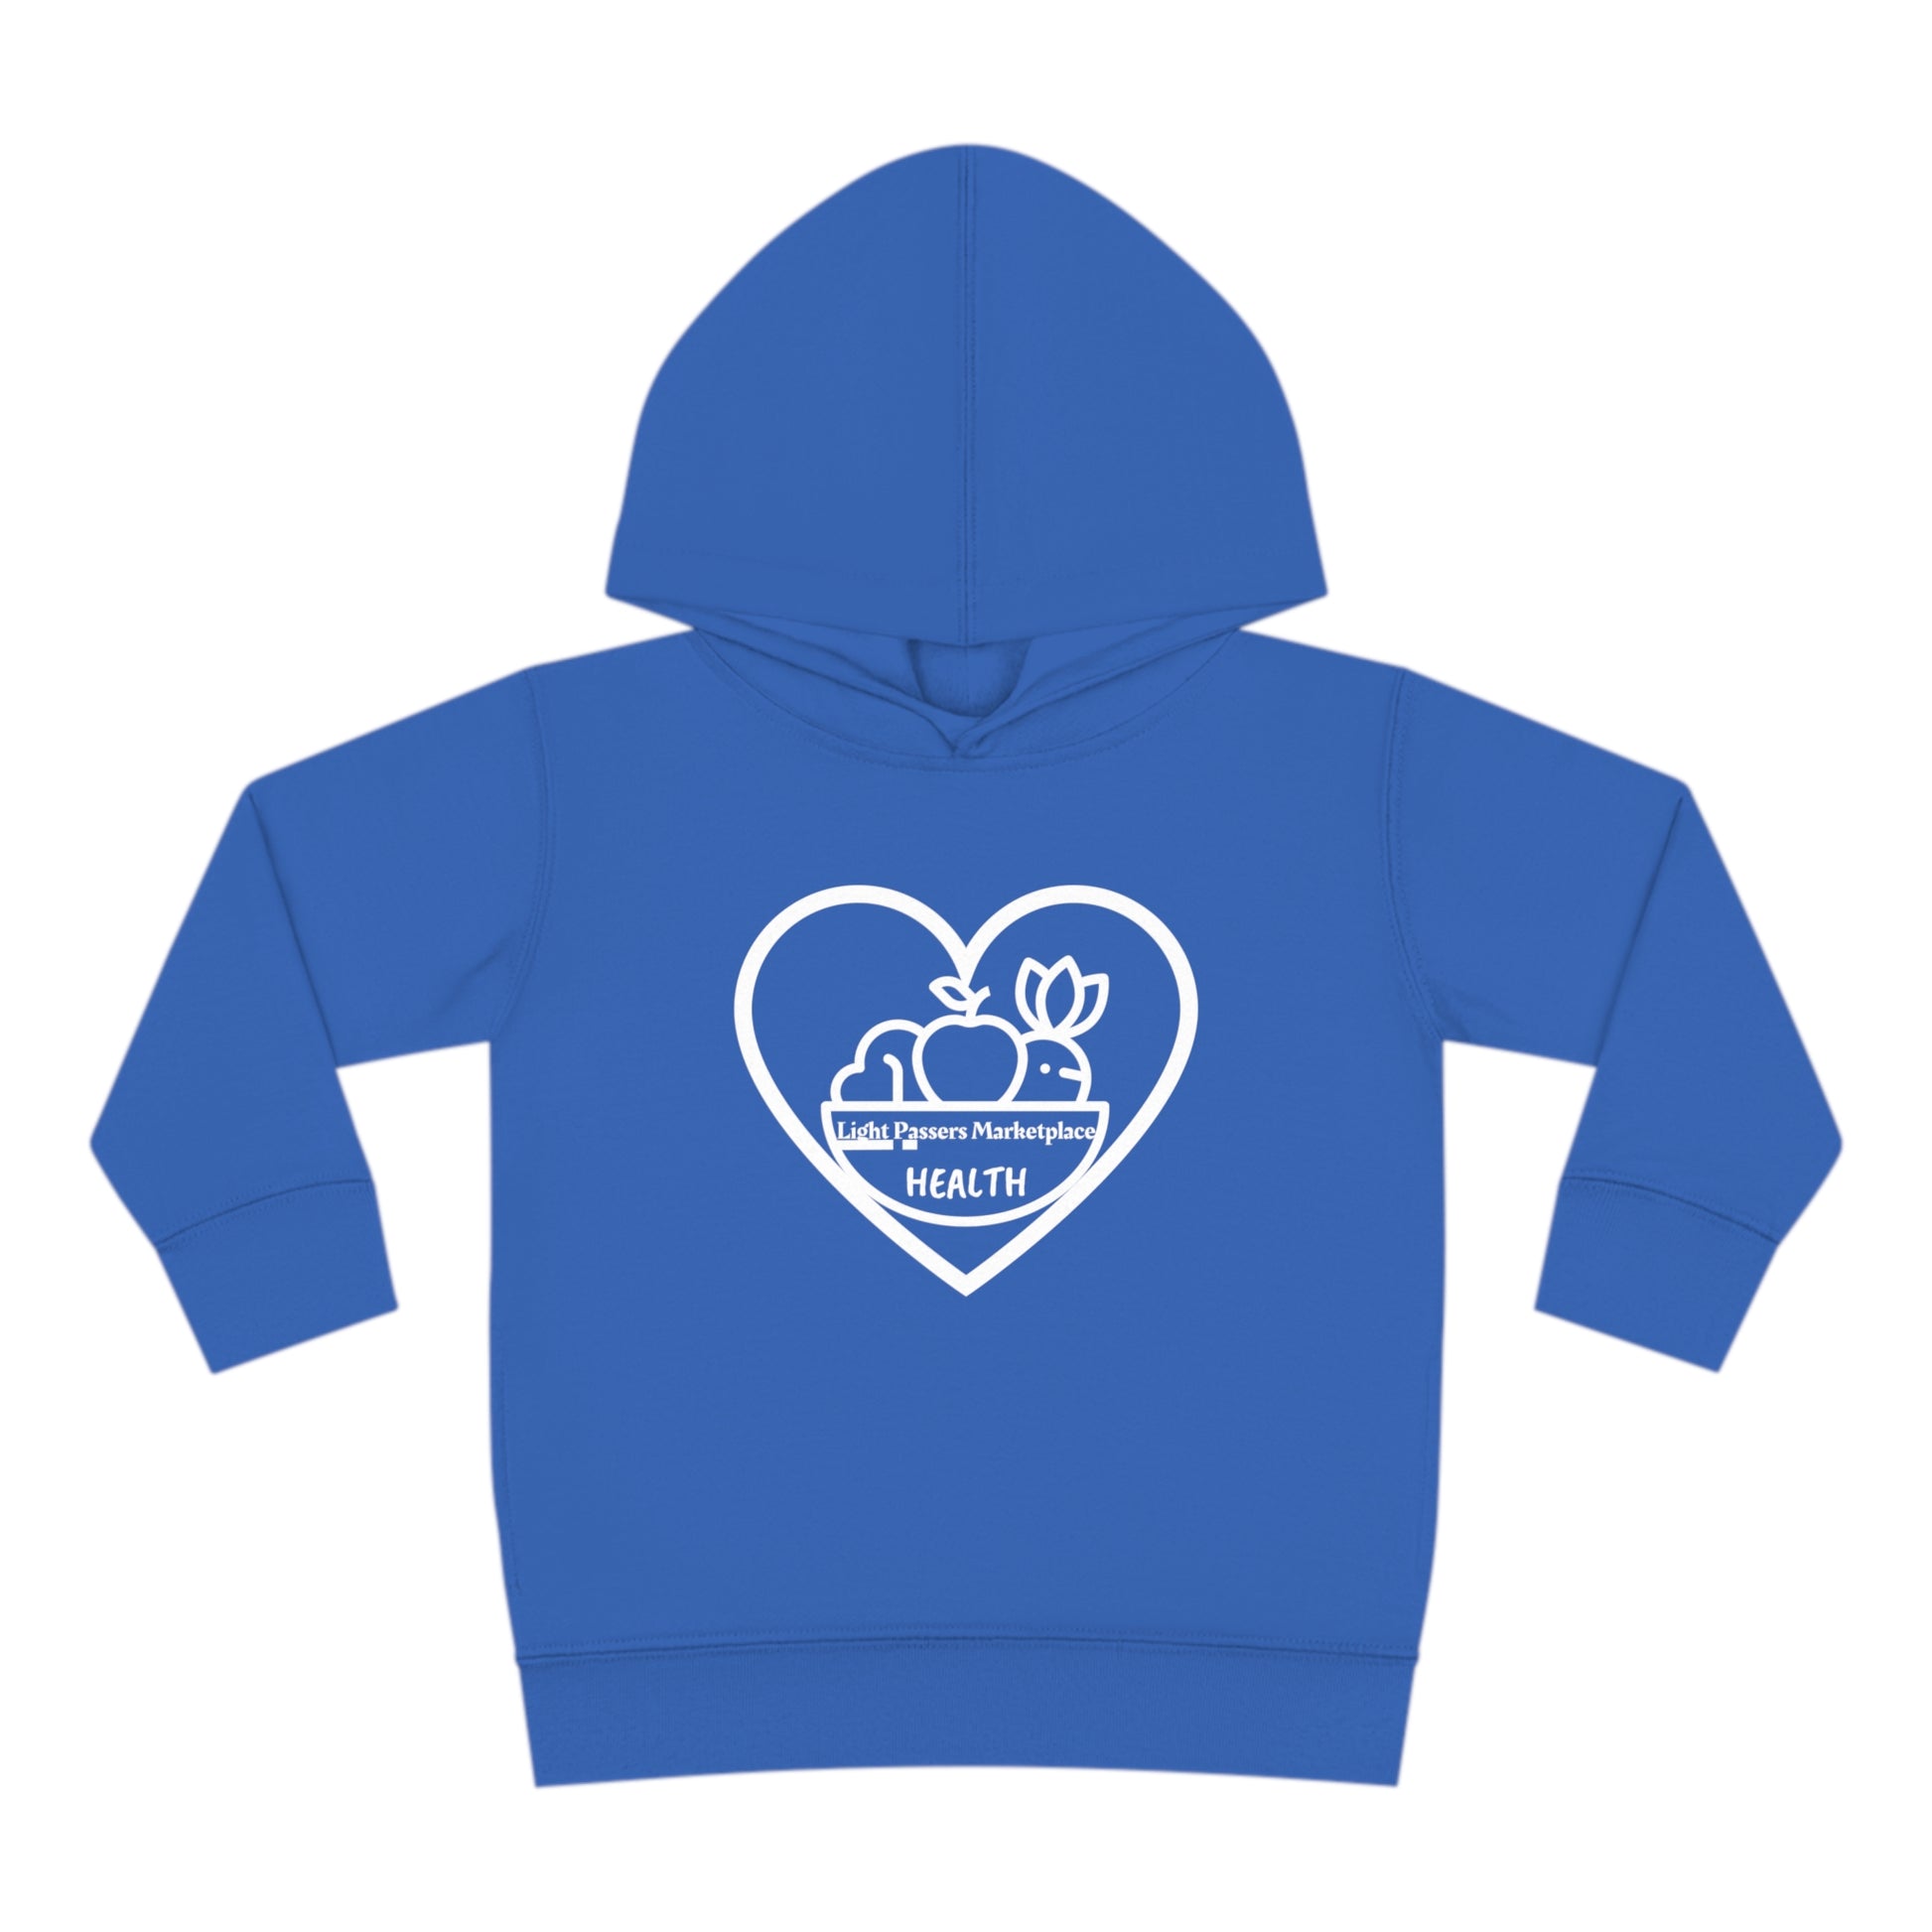 A toddler hoodie featuring a heart and fruit design, with side seam pockets and cover-stitched details for durability and comfort. Made of 60% cotton, 40% polyester blend for coziness.